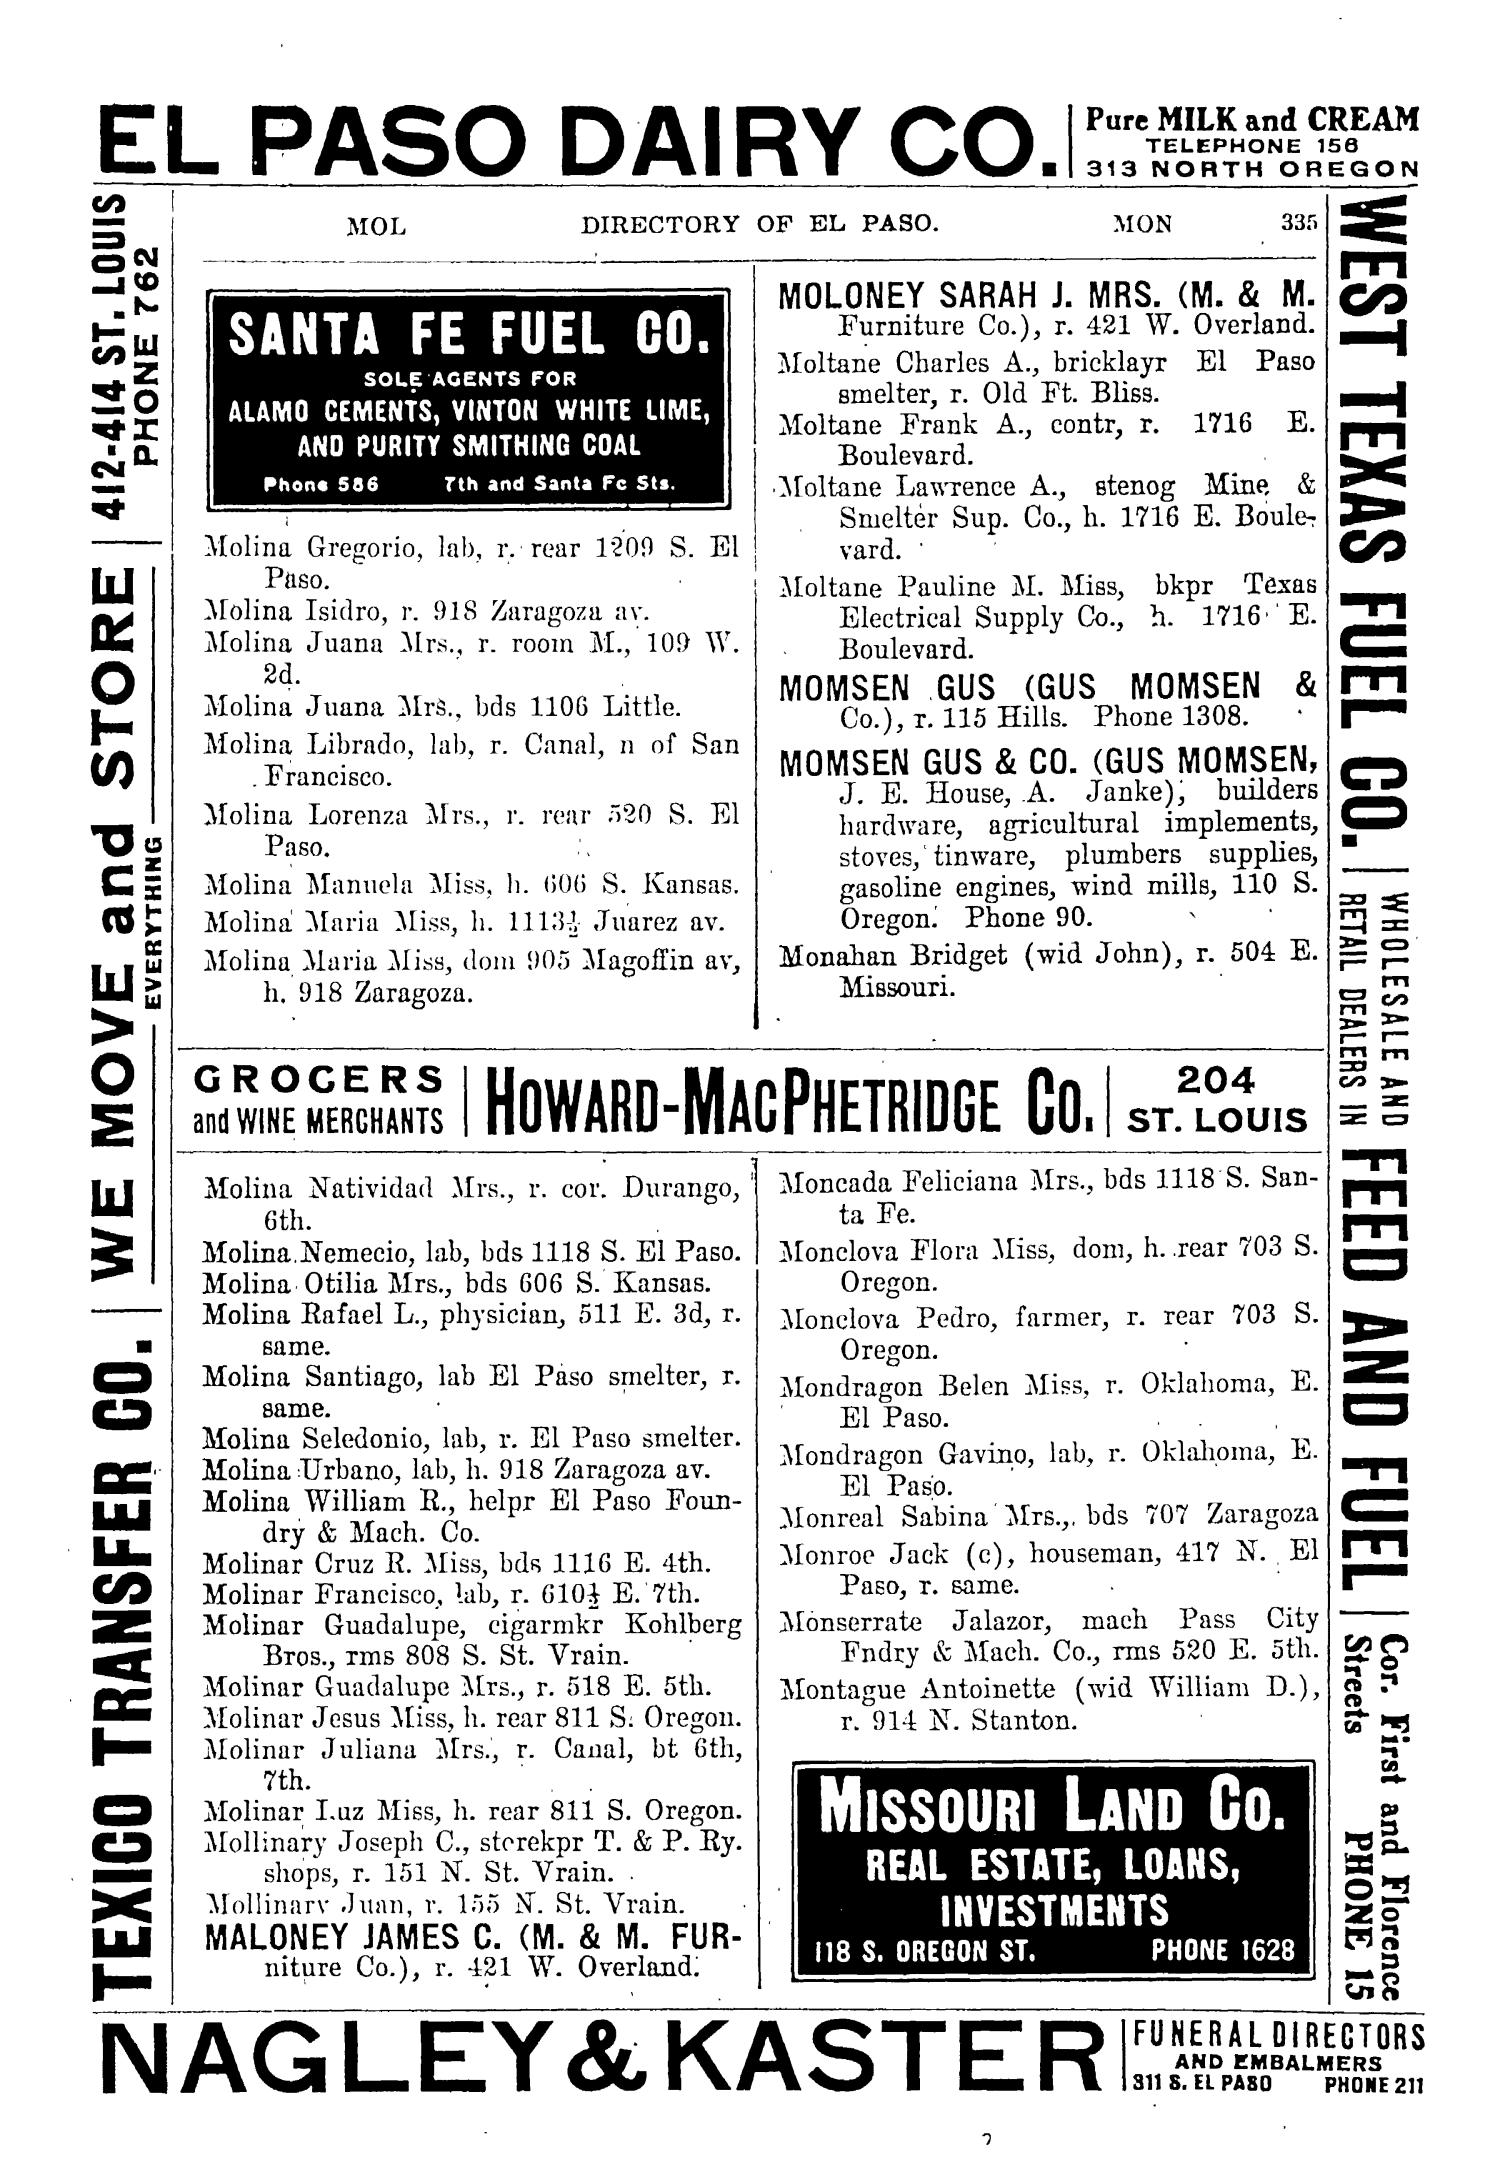 John F. Worley & Co.'s El Paso Directory for 1906
                                                
                                                    335
                                                